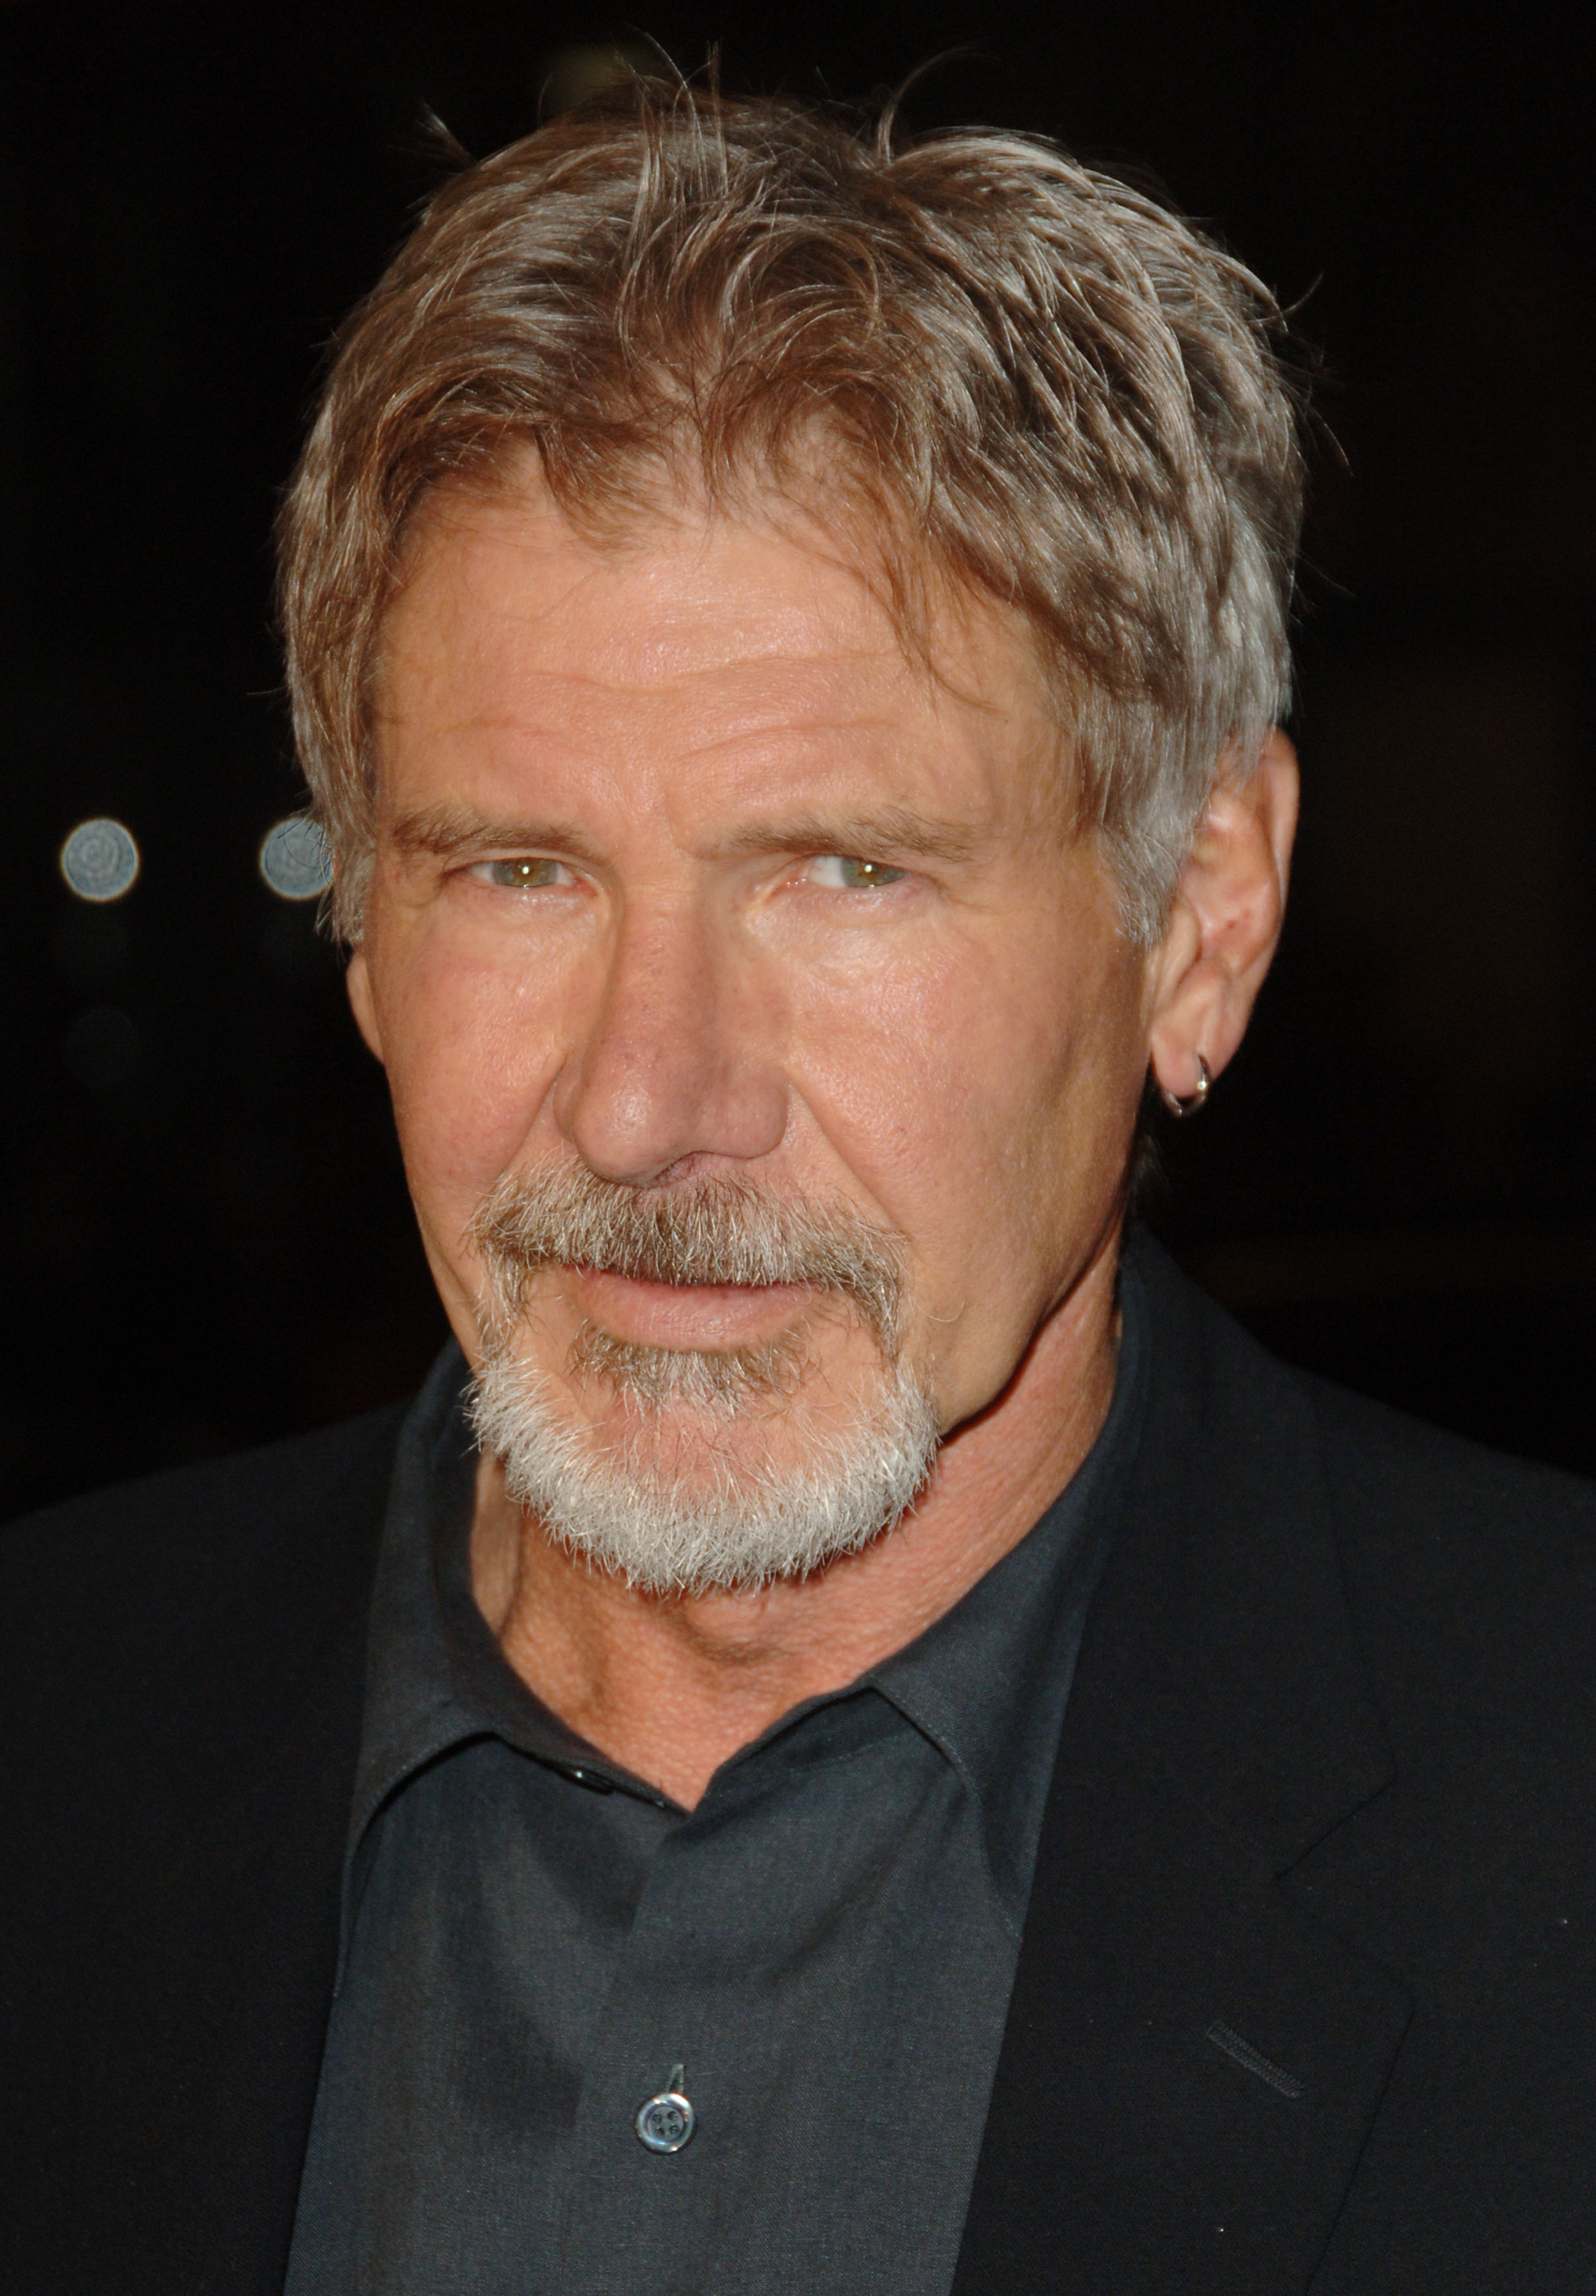 Harrison Ford during "Firewall" Los Angeles Premiere - Arrivals at Grauman's Chinese Theatre in Hollywood, California, United States | Source: Getty Images